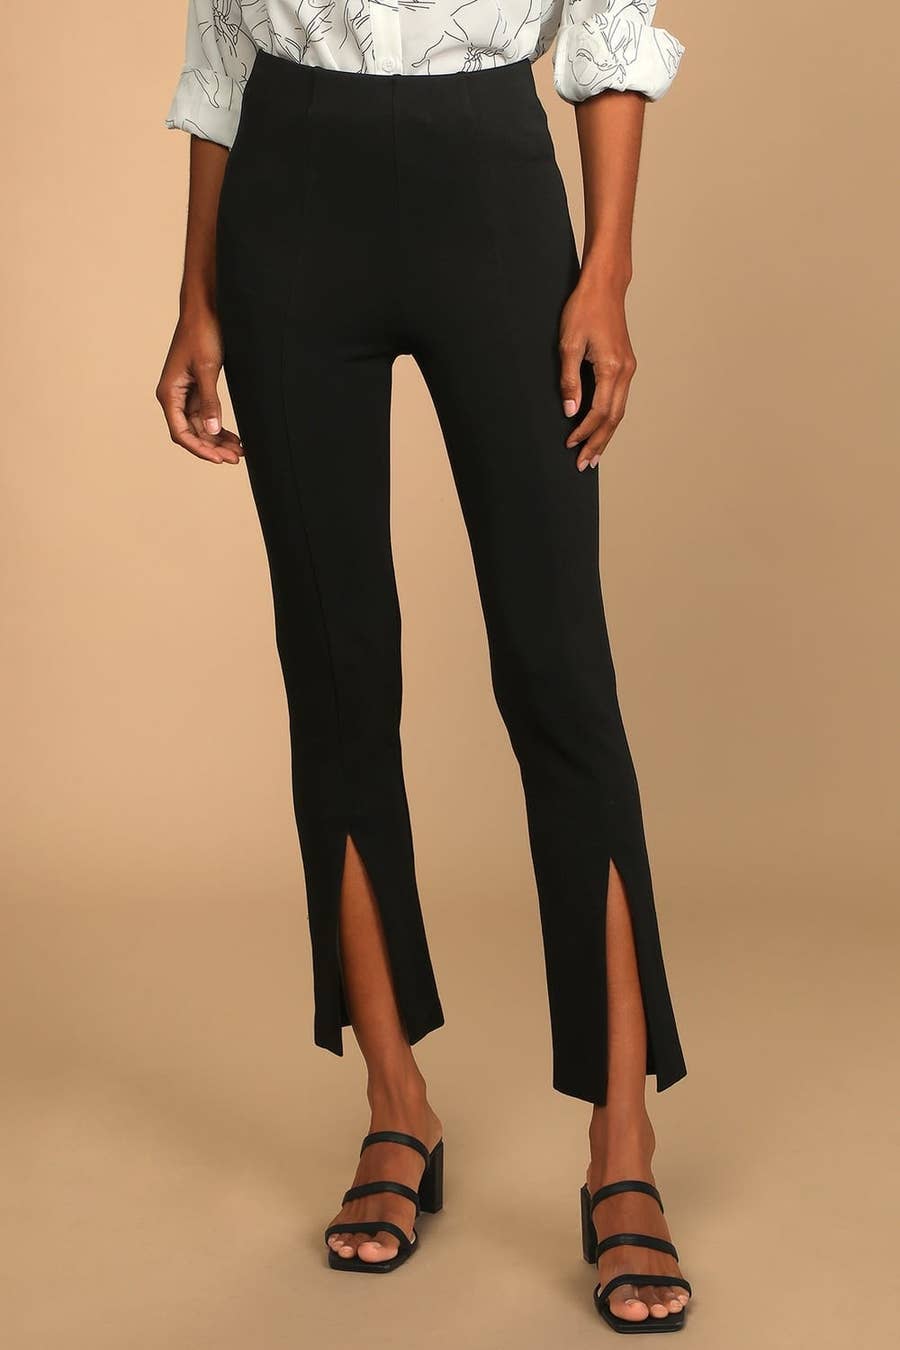 SUPER EXTRA LONG Leggings HIGH WAIST Cotton or Wet Look SIZE Uk 8-20 Tall..